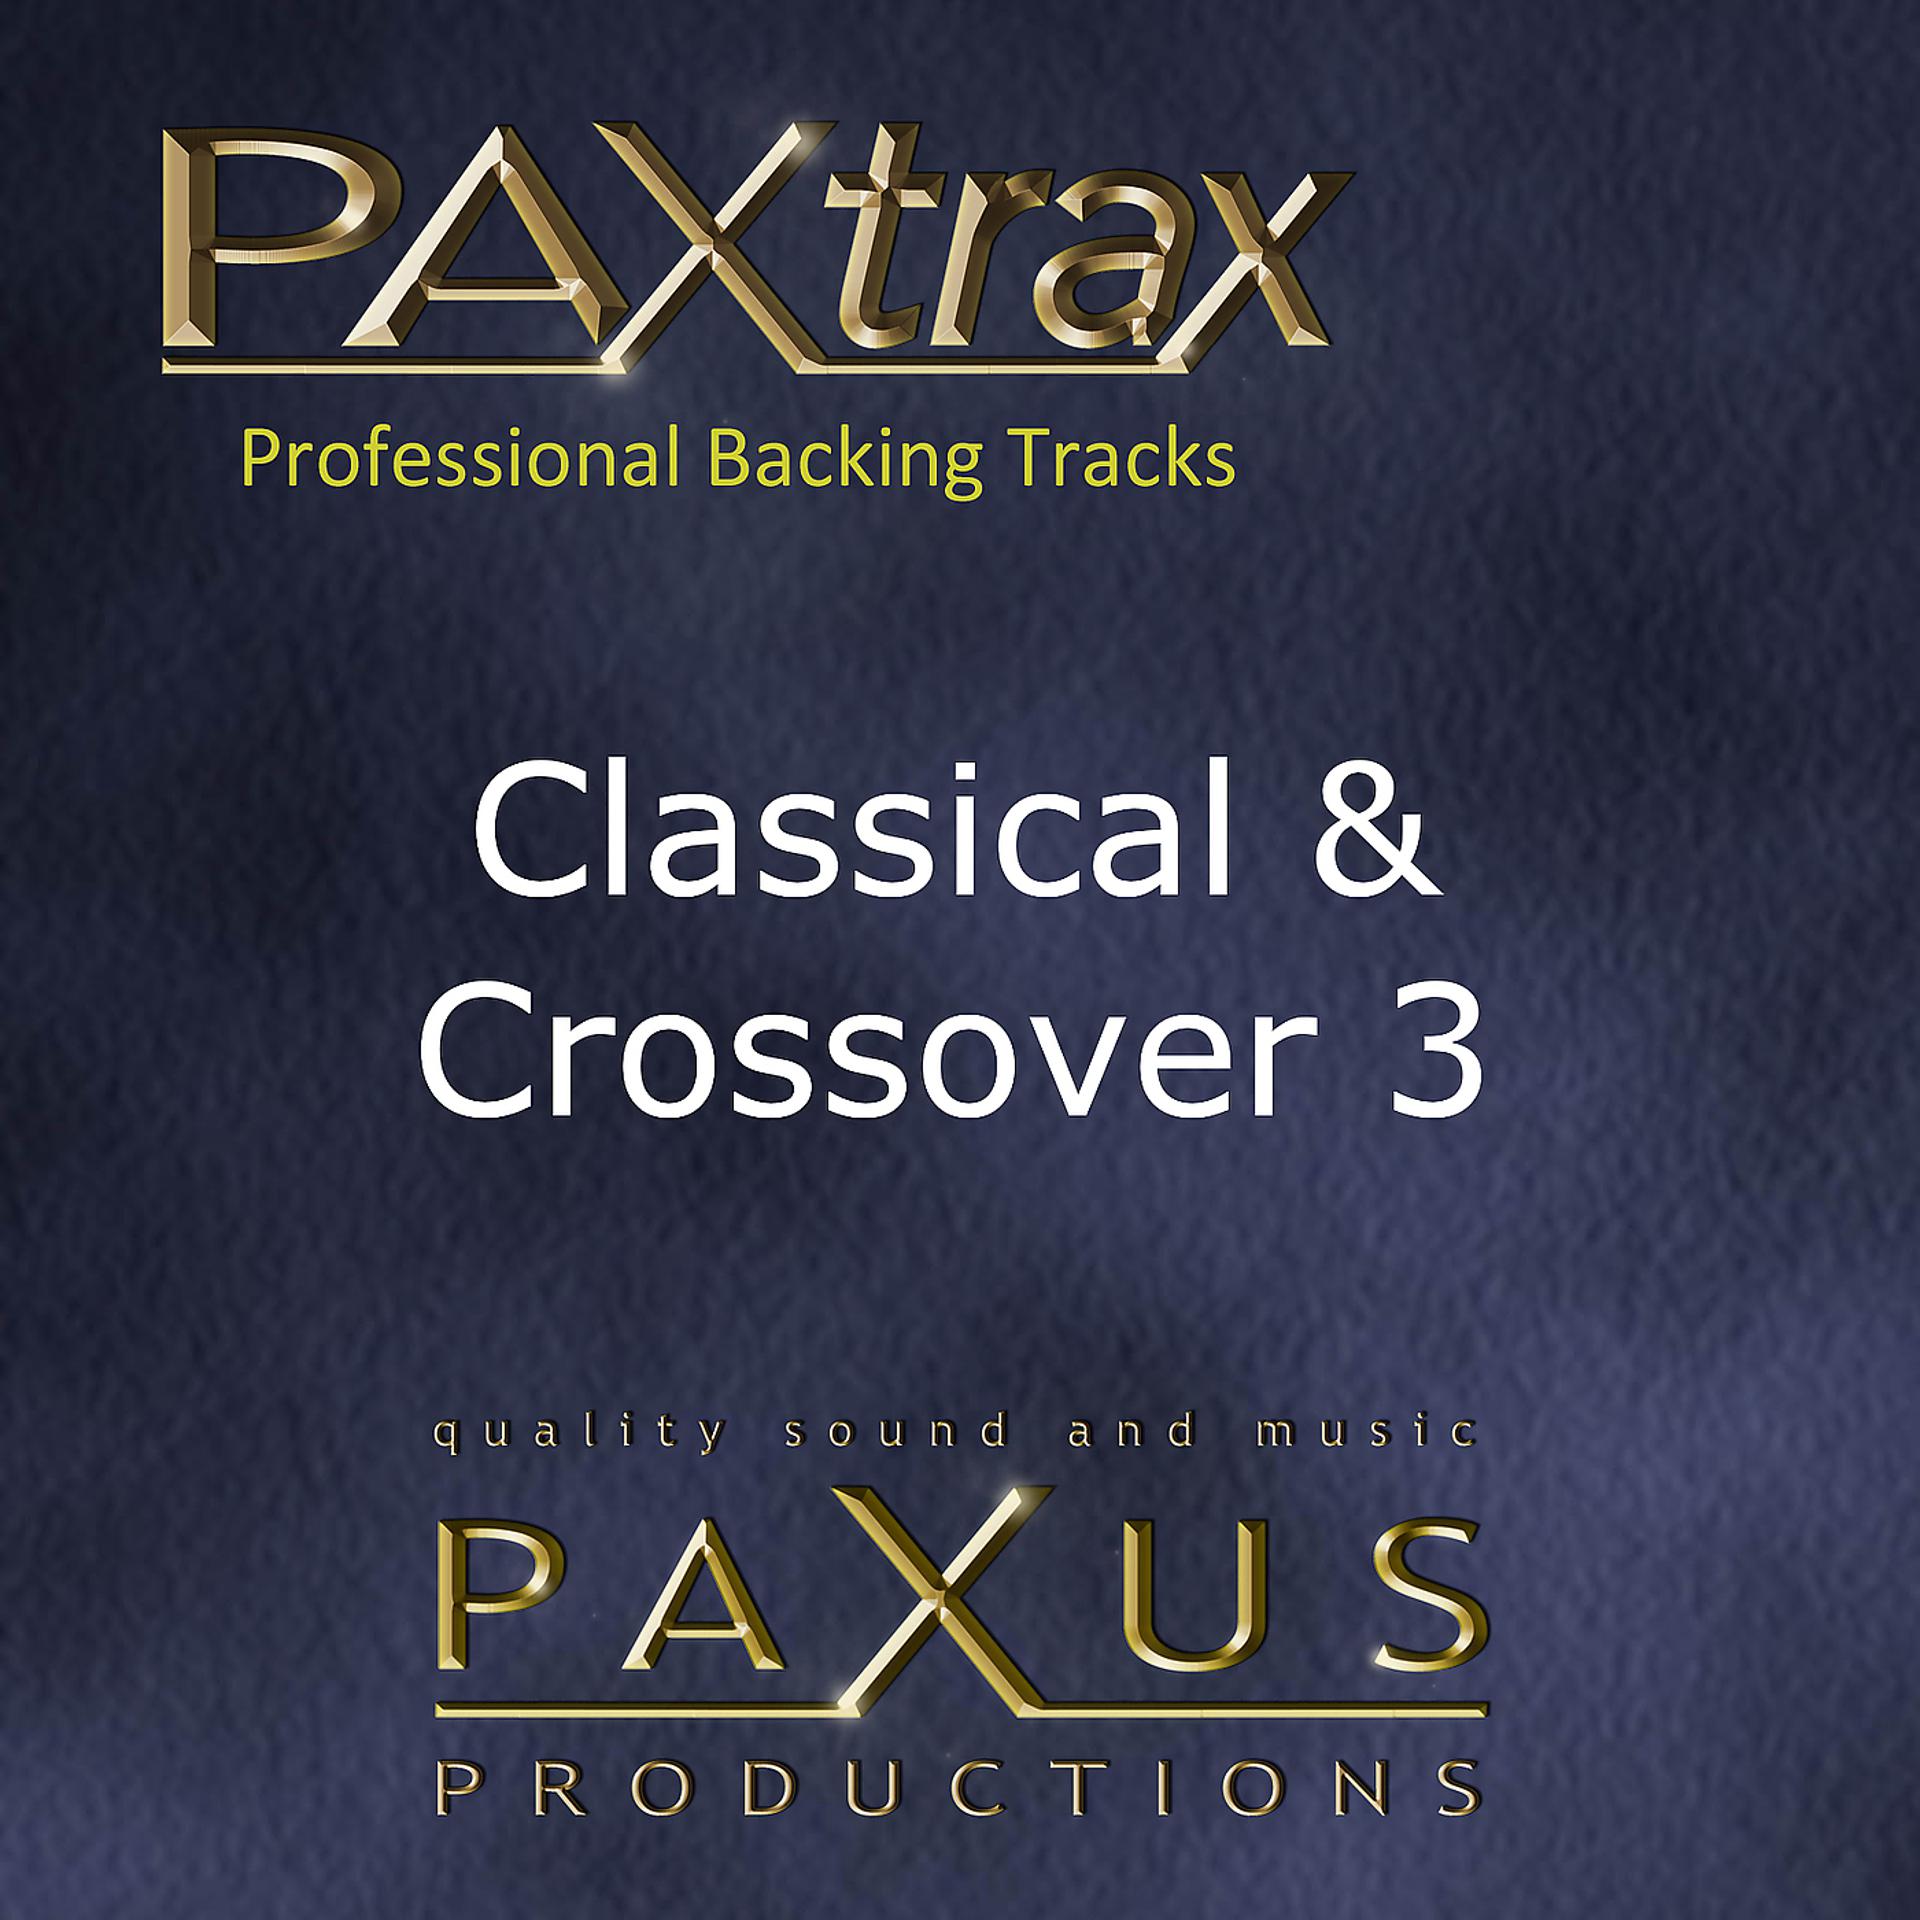 Постер альбома Paxtrax Professional Backing Tracks Classical & Crossover 3